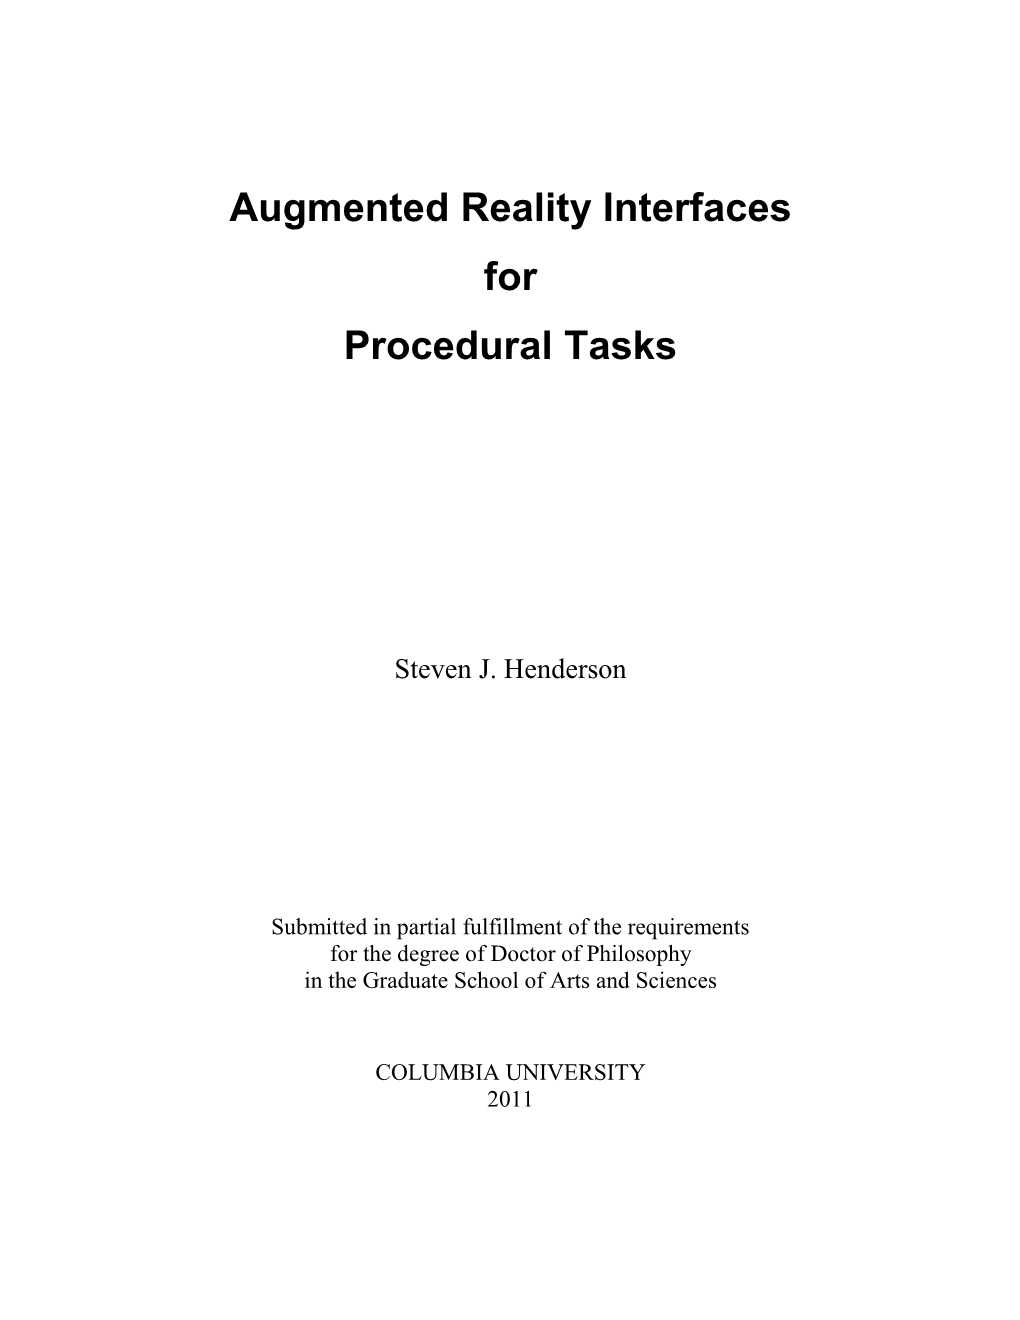 Augmented Reality Interfaces for Procedural Tasks